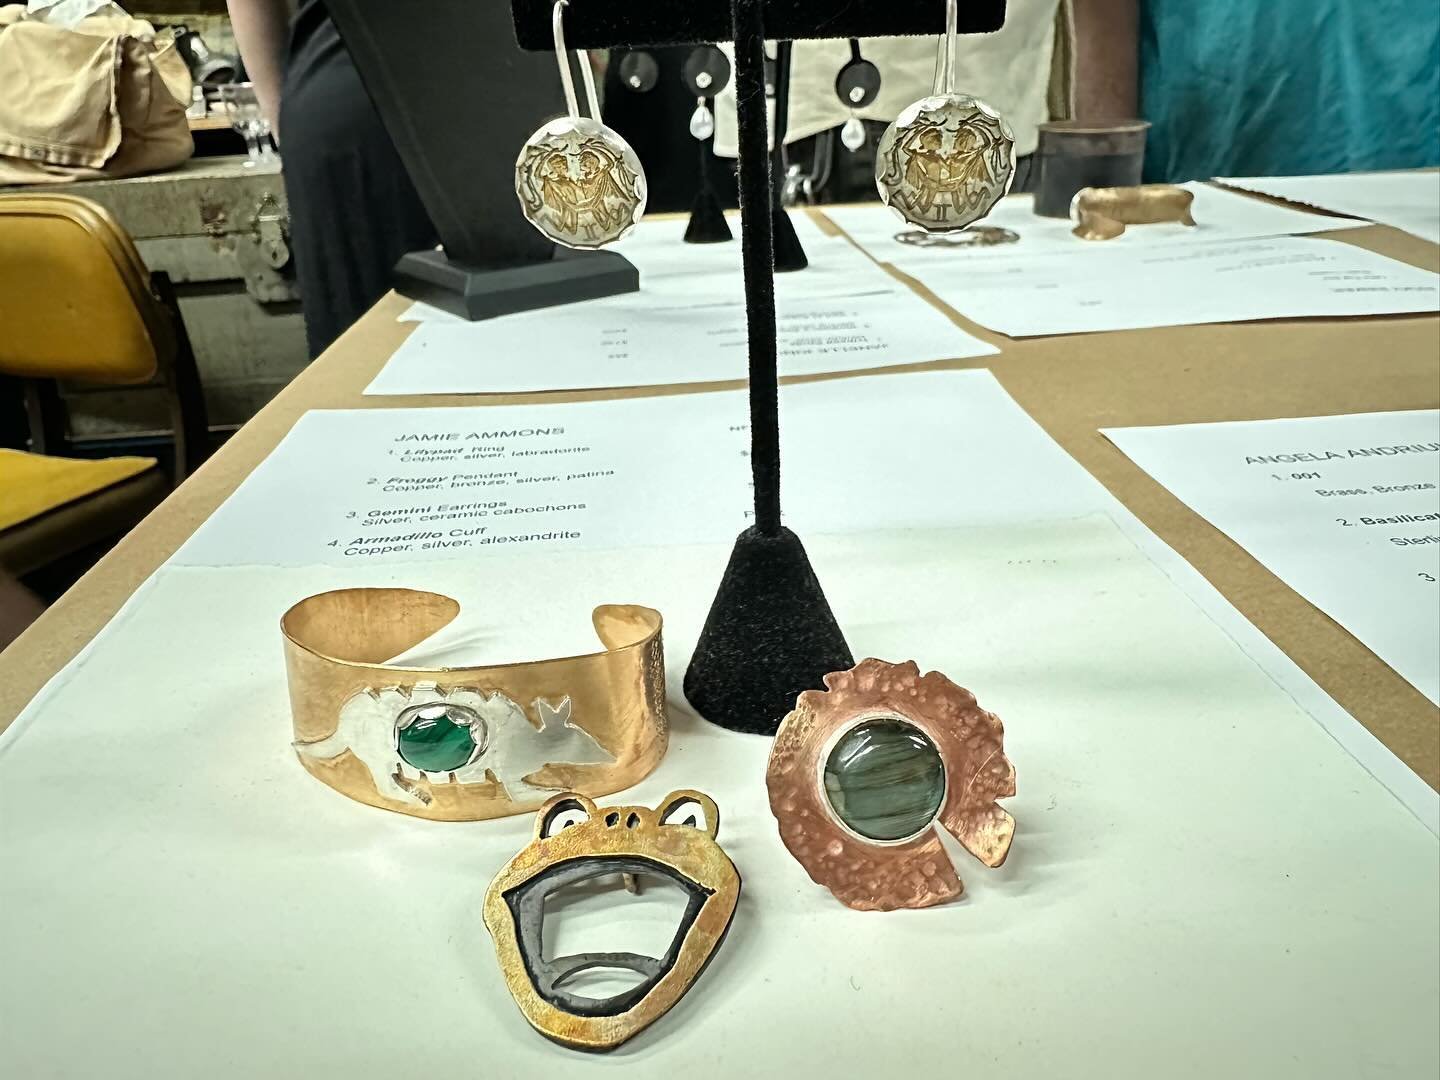 A special congratulations to Geminitoothgemz&rsquo;s co-owner Jamie Ammons for completing her first metal smithing class, and producing/selling amazing art/jewelry at her first showcase. A new chapter for Geminitoothgemz is starting, so stay tuned. #